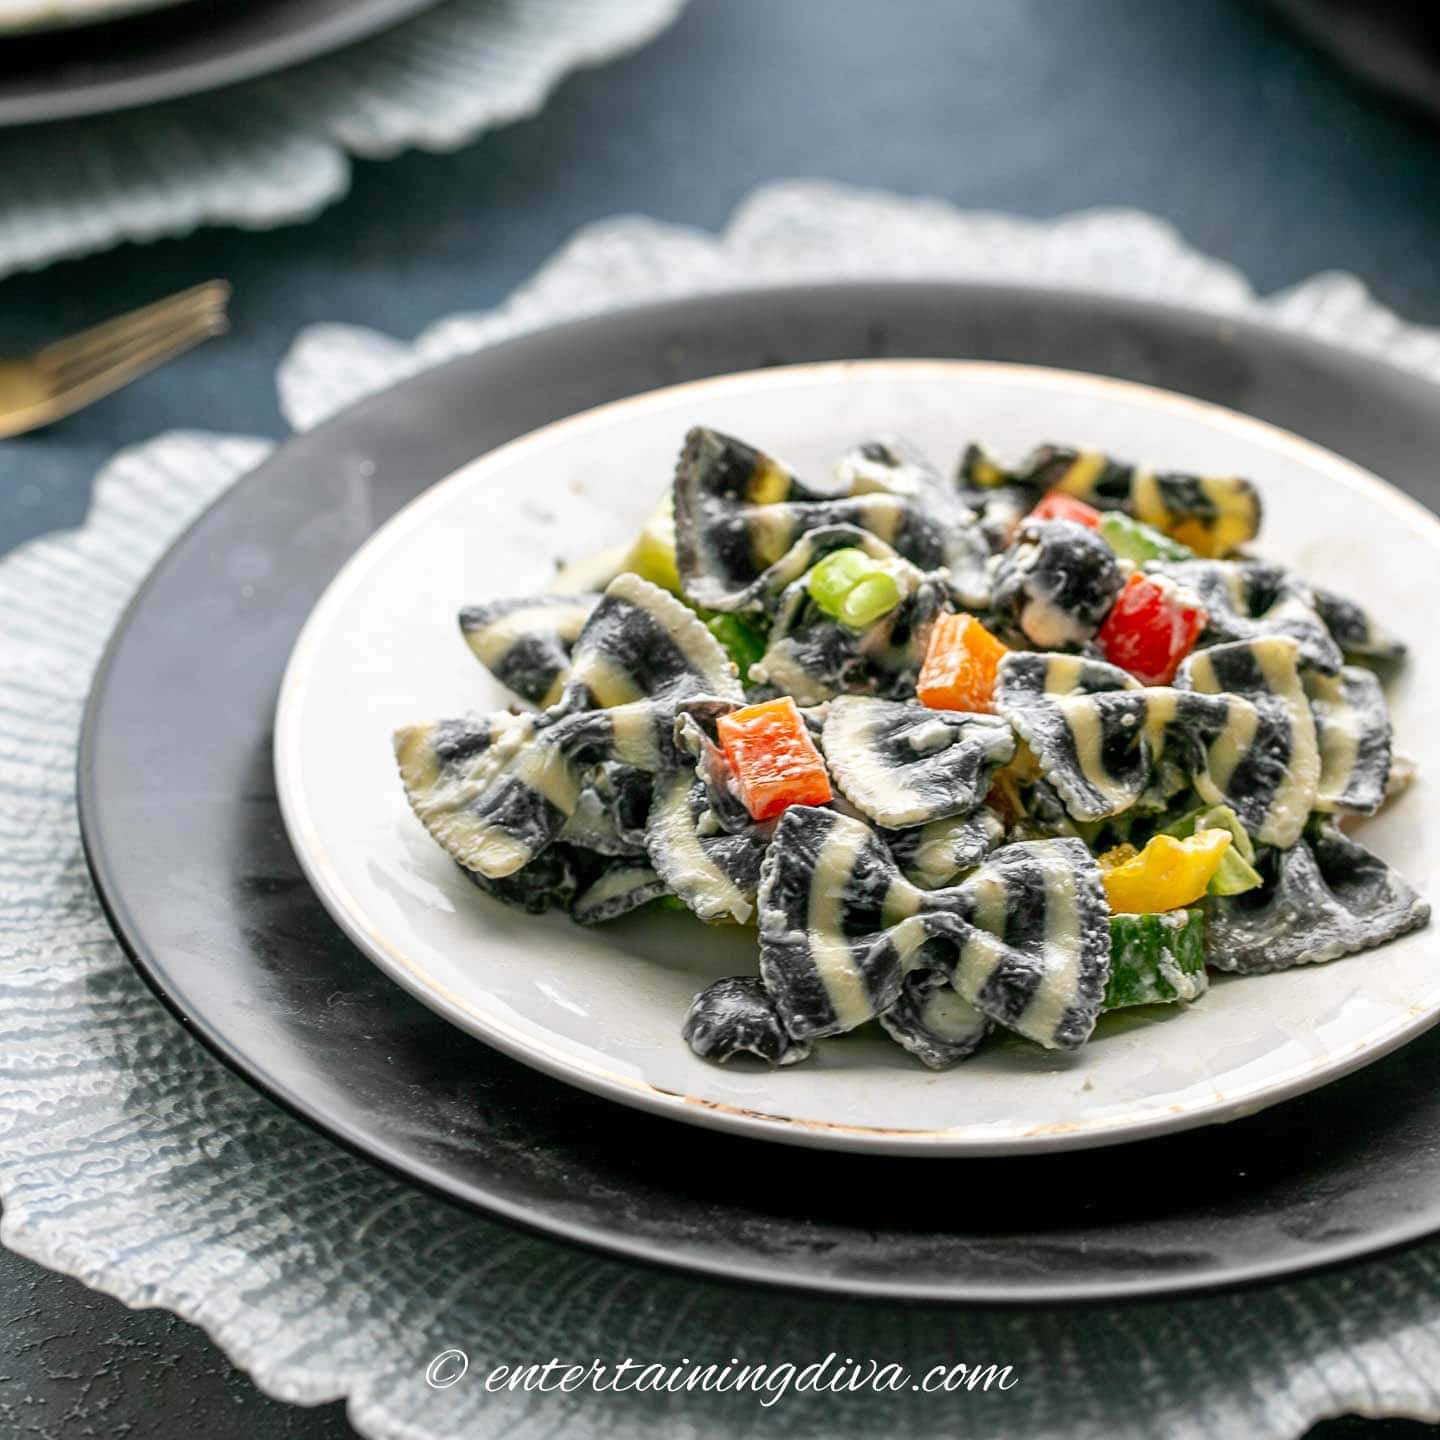 A plate of black and white bow tie pasta salad at a Phantom of the Opera Party.